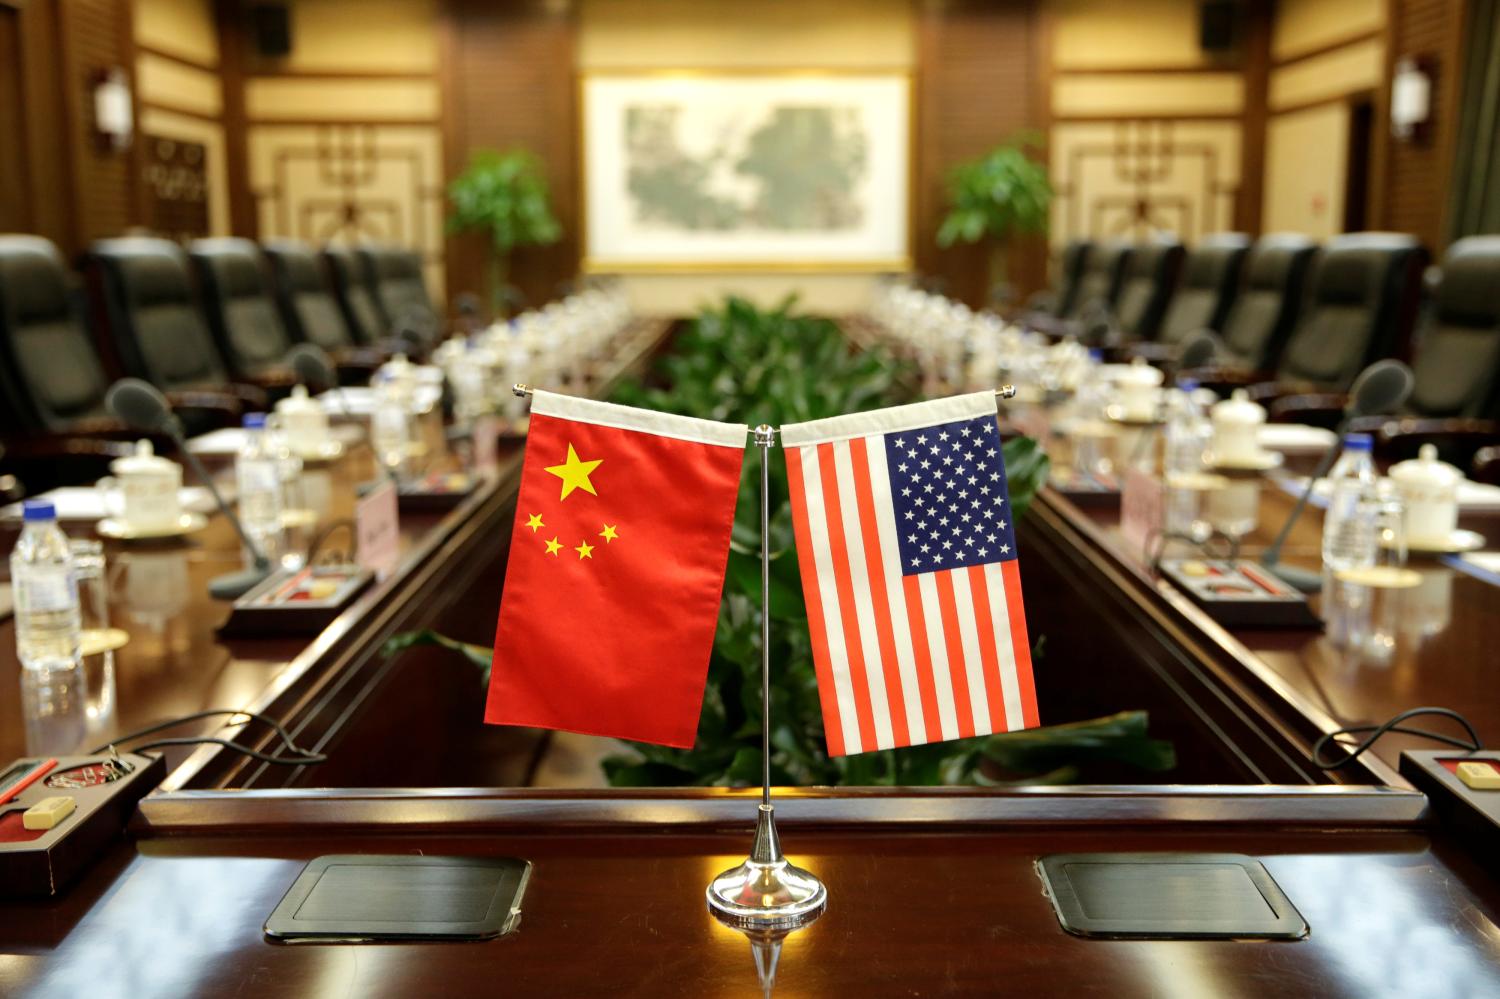 Flags of U.S. and China are placed for a meeting between Secretary of Agriculture Sonny Perdue and China's Minister of Agriculture Han Changfu at the Ministry of Agriculture in Beijing, China June 30, 2017. REUTERS/Jason Lee - RC1A8F925660